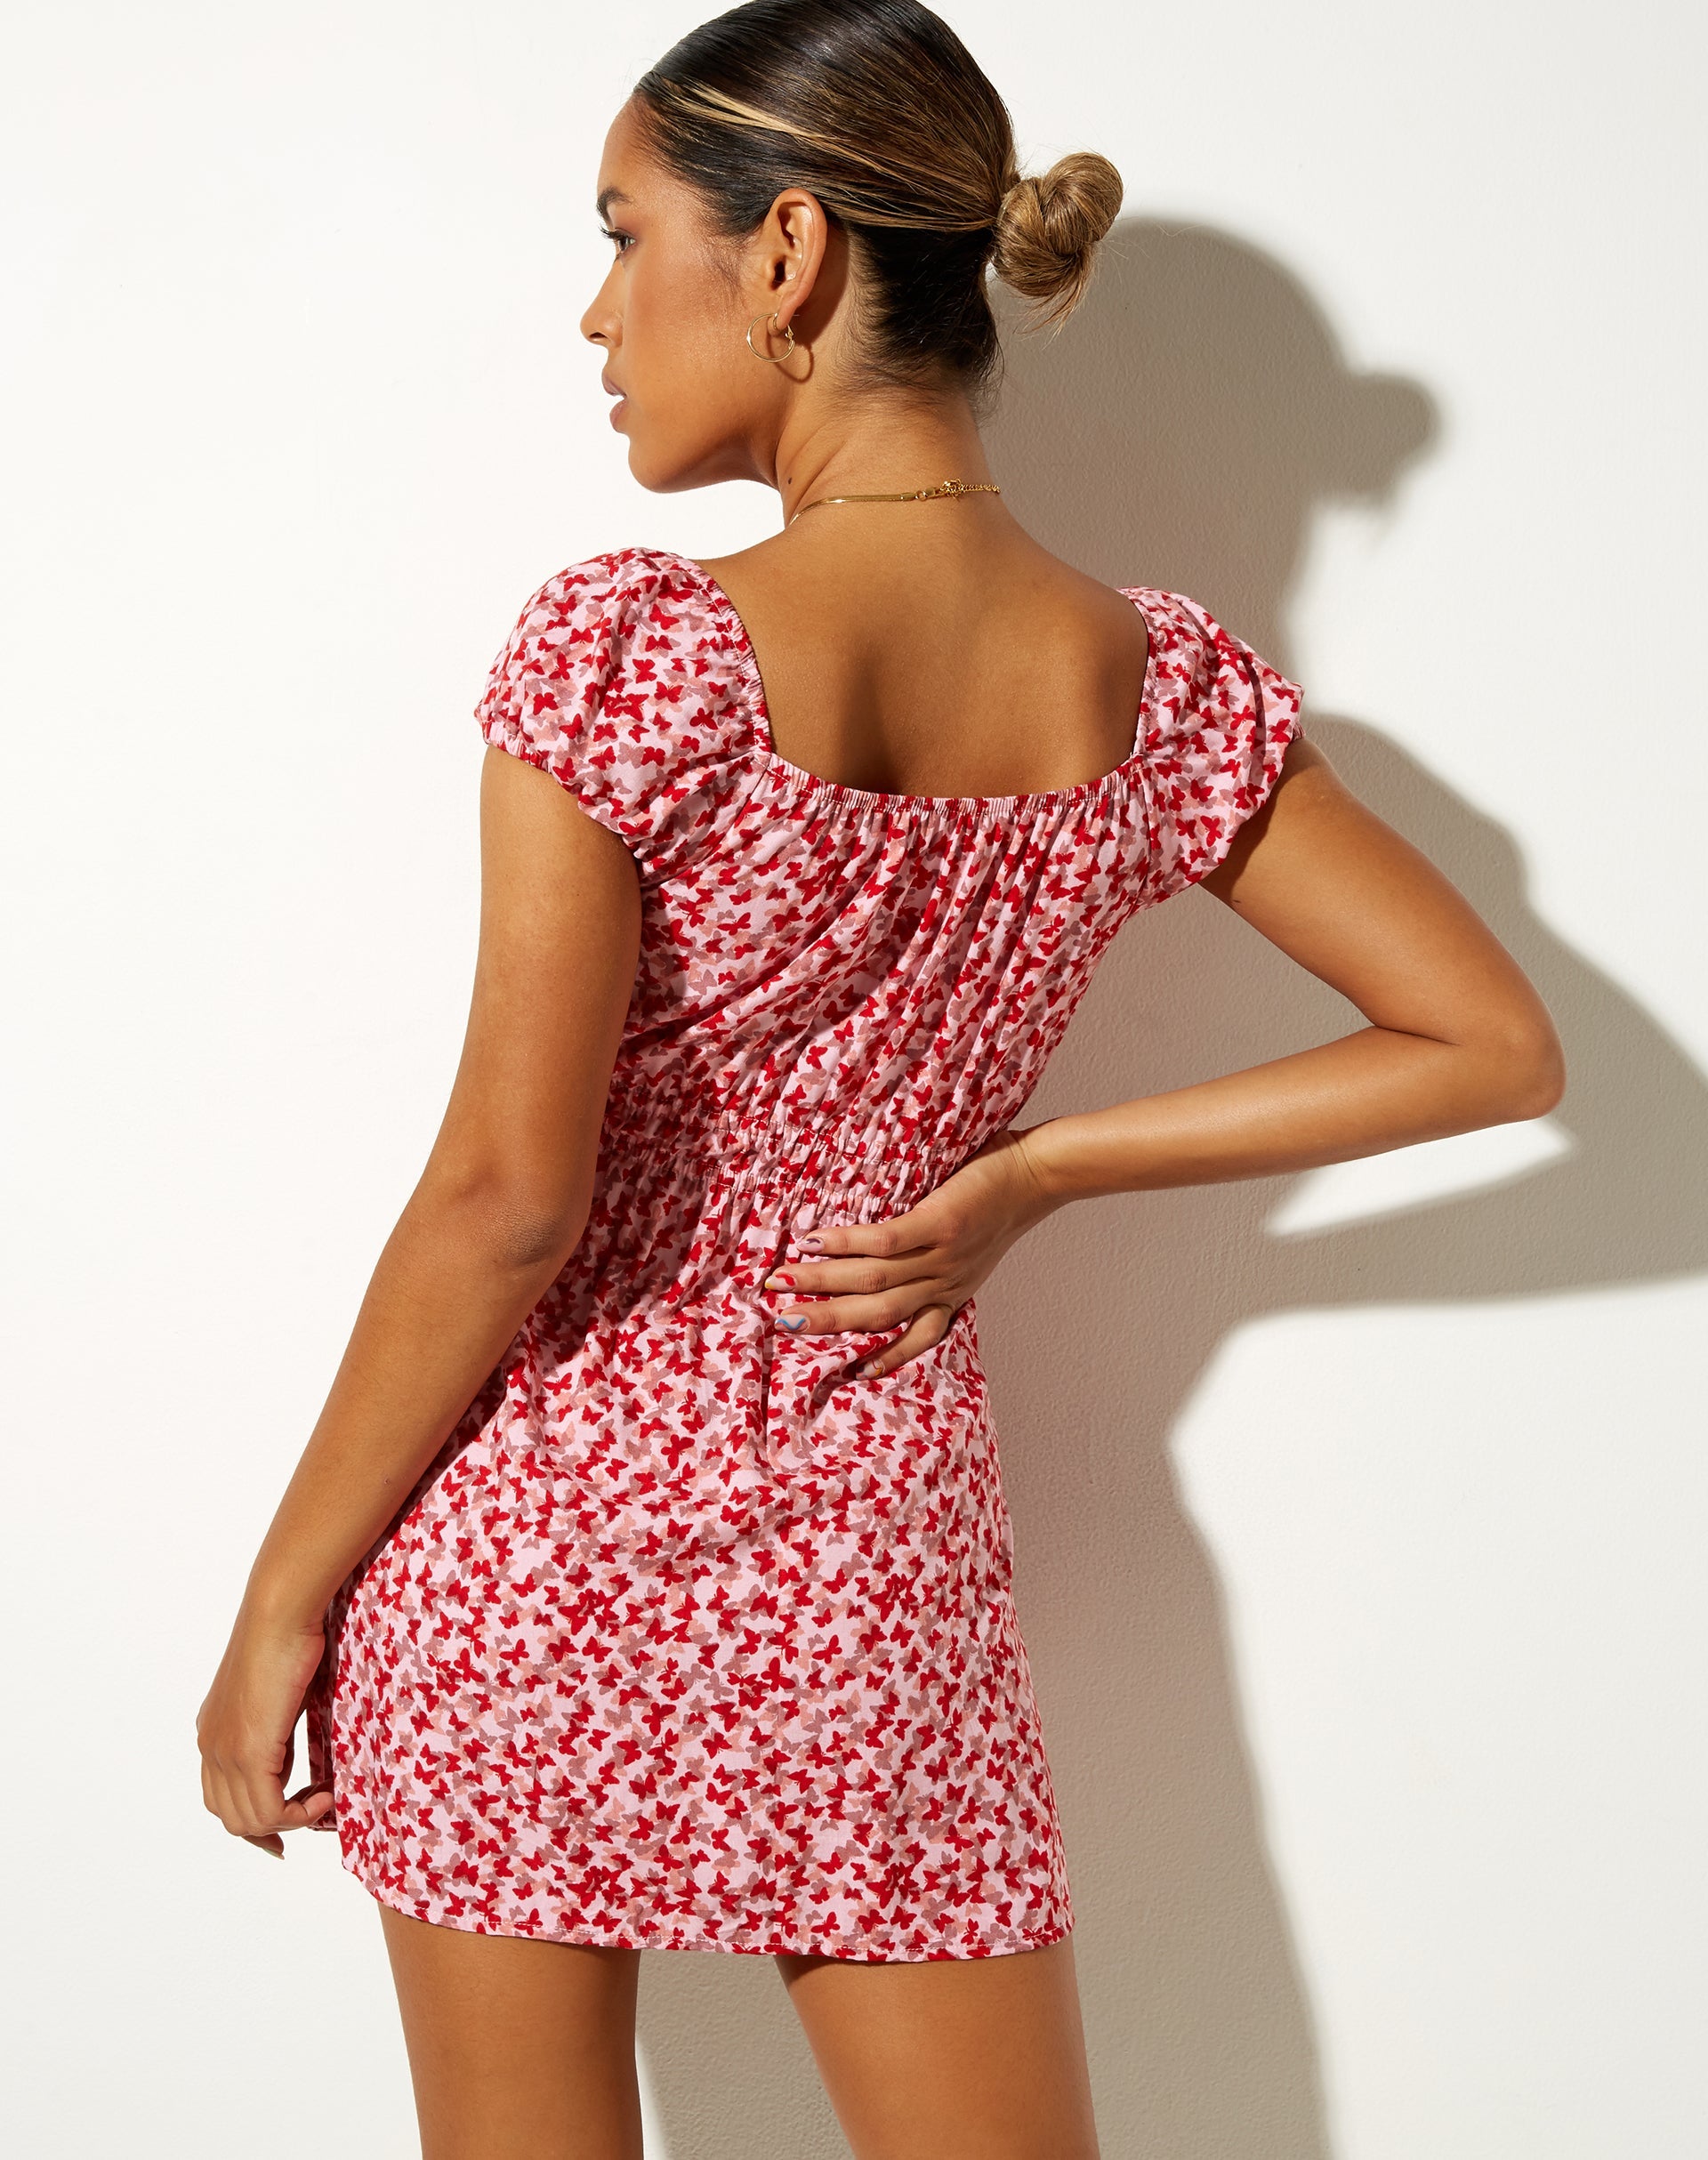 Image of Galova Mini Dress in Ditsy Butterfly Peach and Red